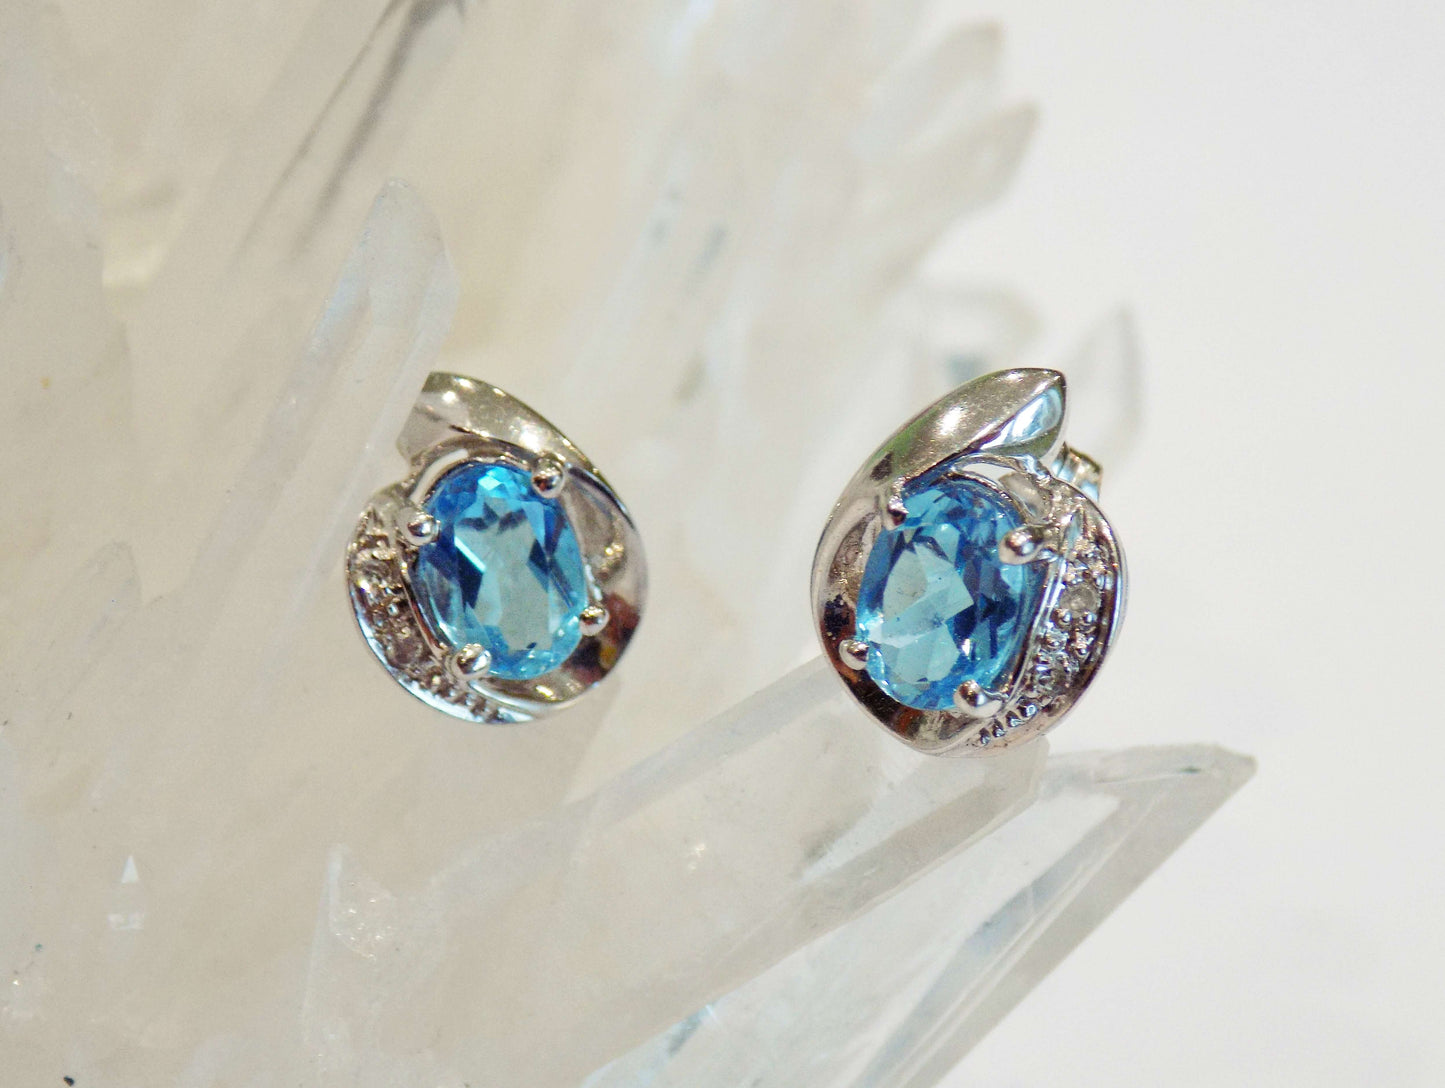 14K White Gold Earrings with Blue Topazes and Diamonds